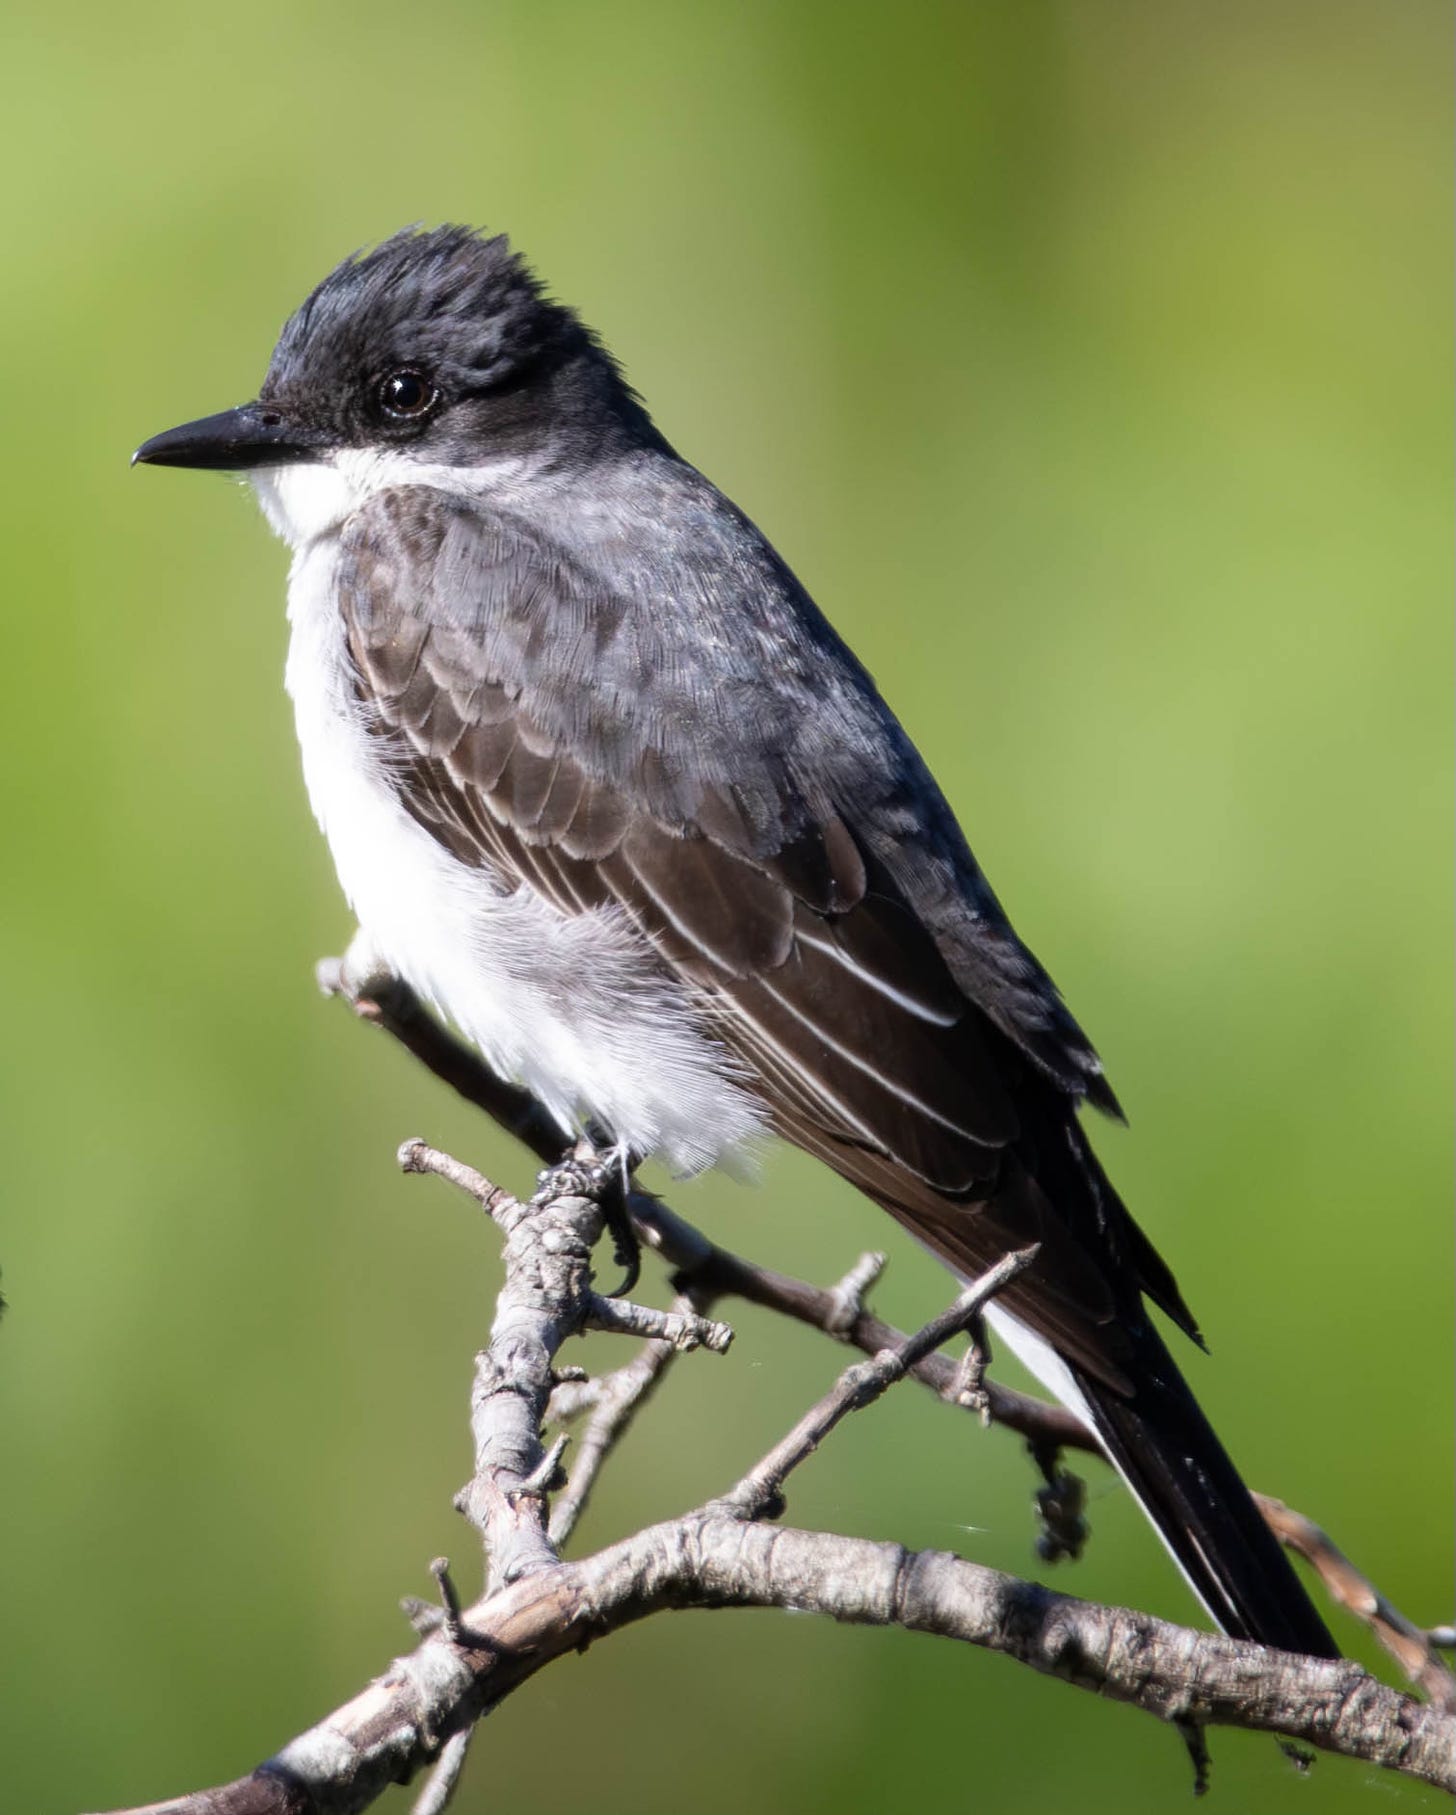 An Eastern kingbird (bird with a dark gray head, back, and wings and a white breast and belly) perches on a naked tree branch